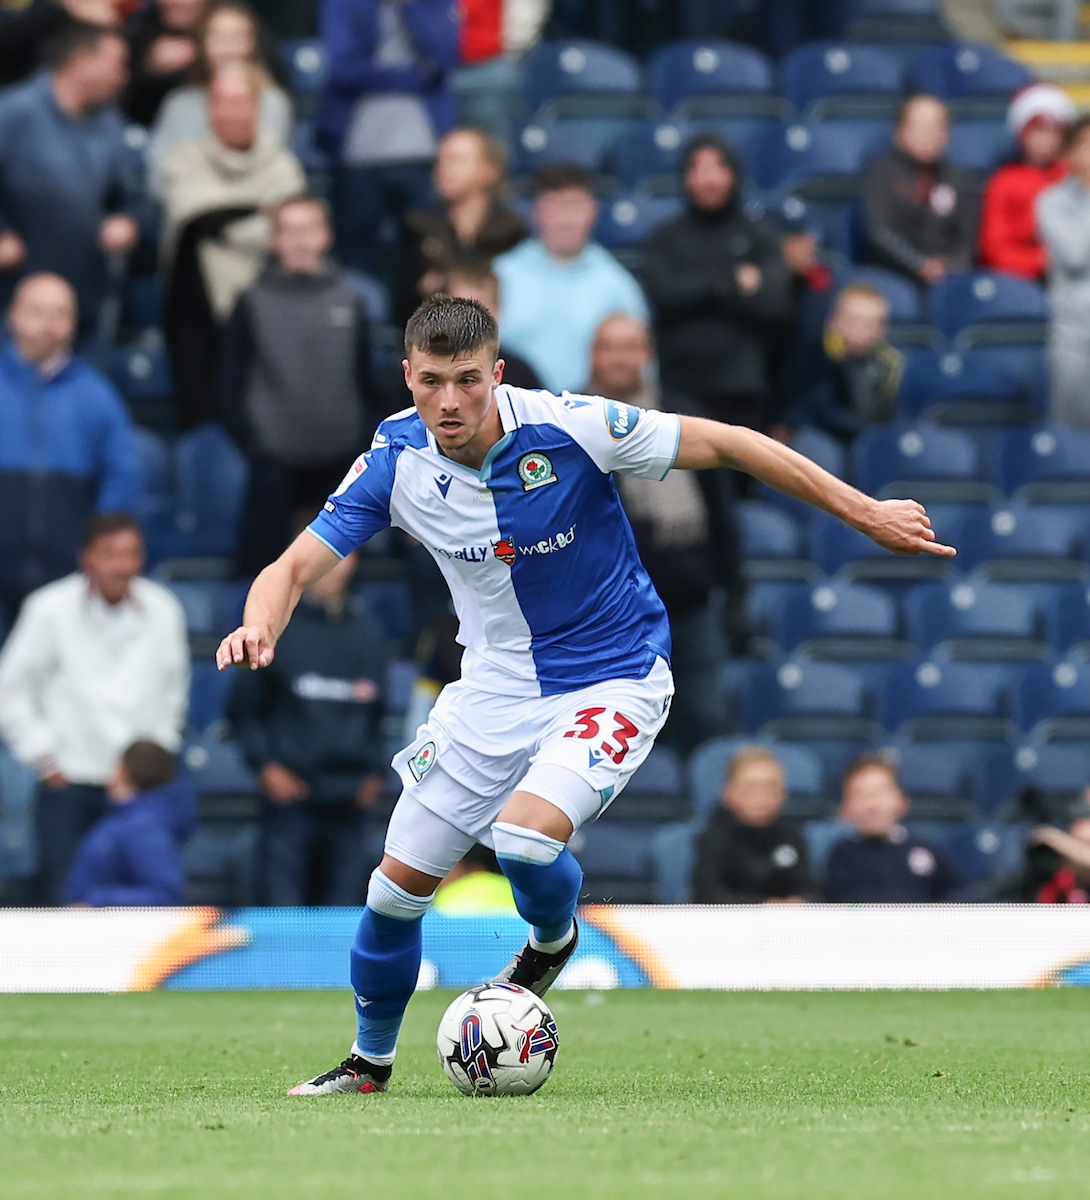 Tomasson calls for Blackburn Rovers patience with Telalovic